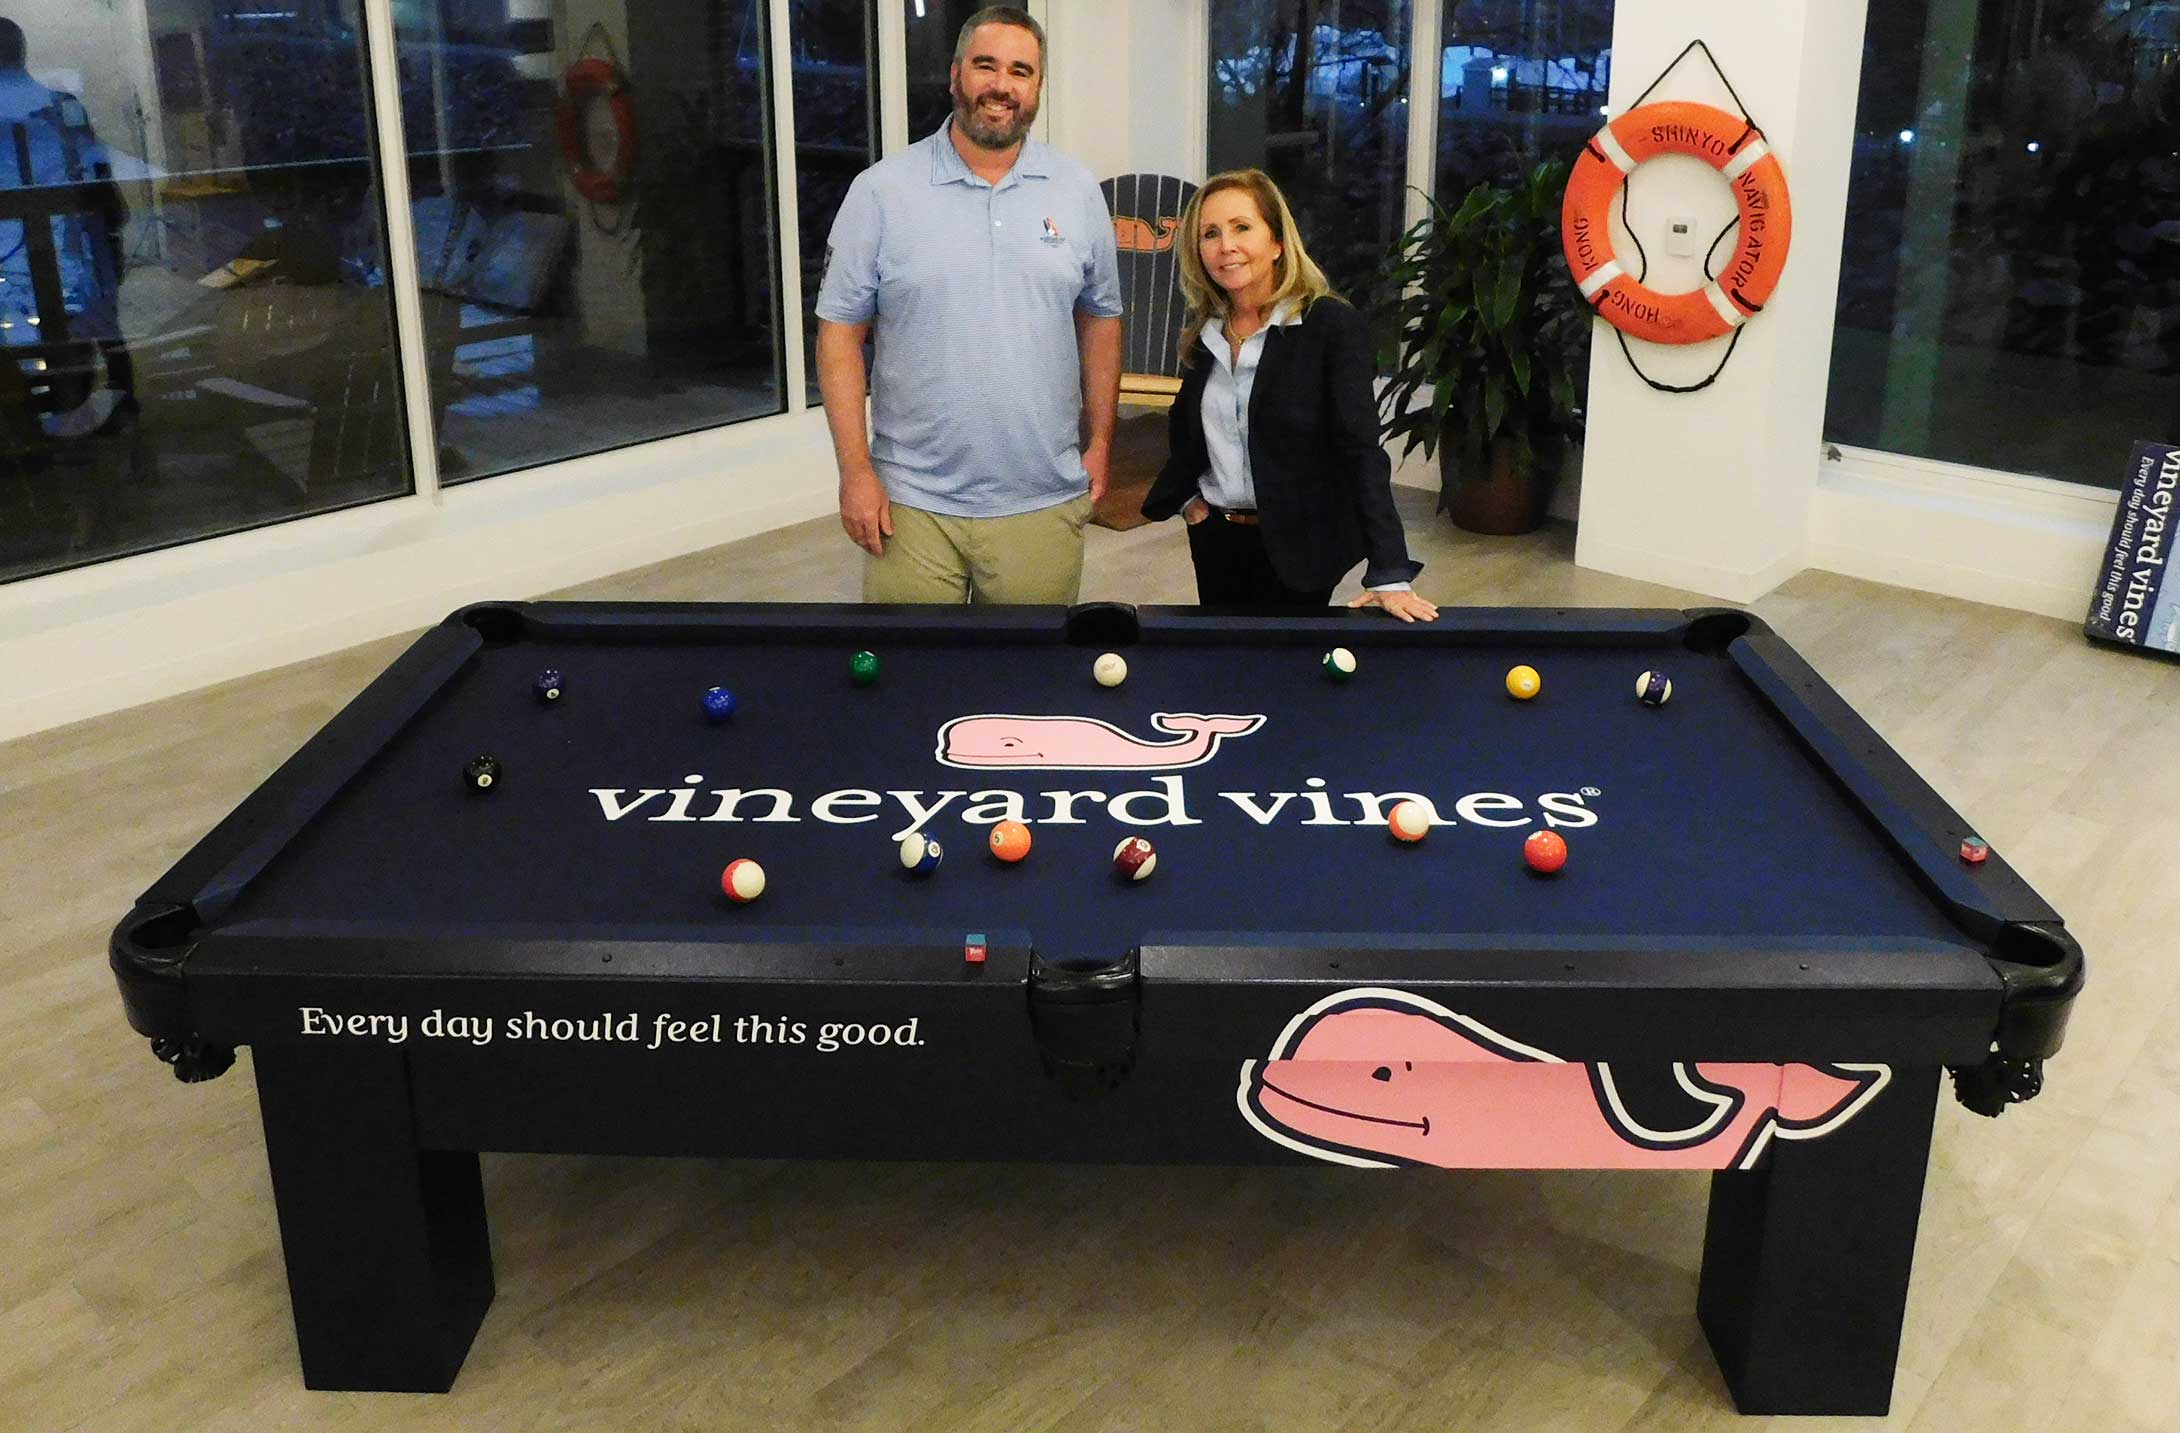 Robbie Selby and Shep Murray posing with Vineyard Vines customer Orion all weather pool table